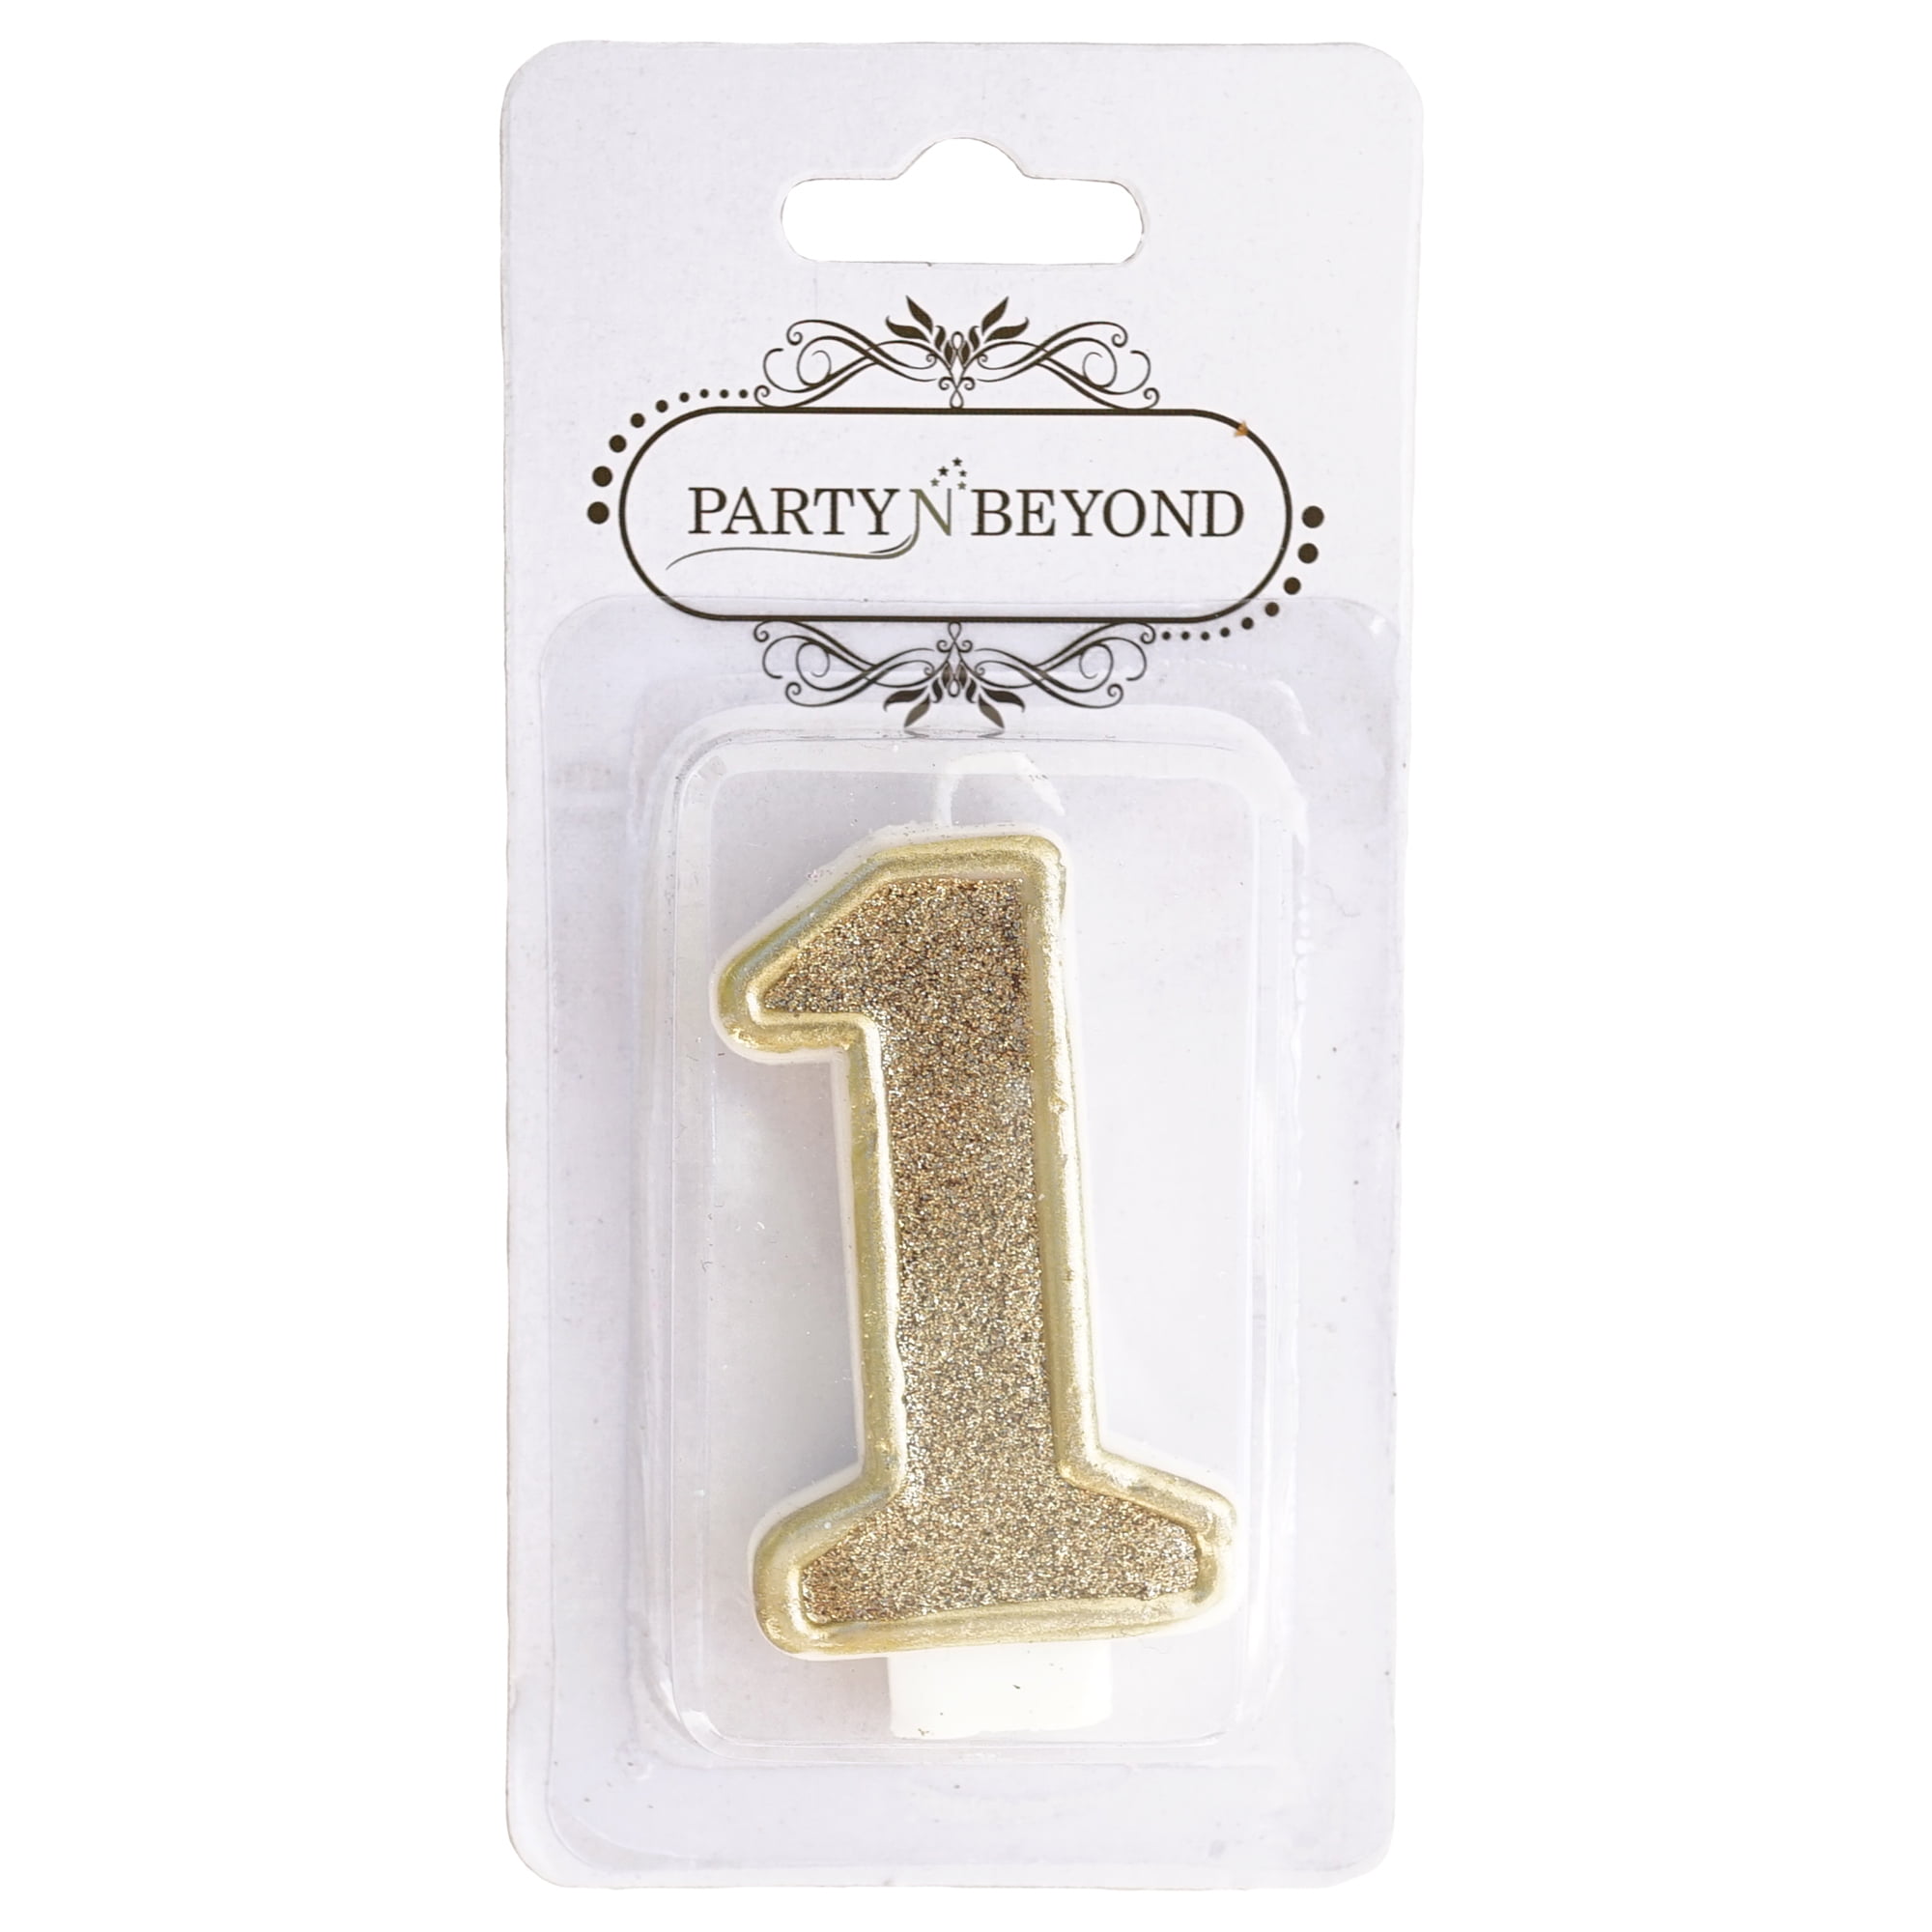 Gold 0,1,2,3,4,5,6,7,8,9 Candle Birthday Candle Gold 21st,30th,40th,50th,60th,70th,80th,90th,100th Candle,Gold Candle Gold Number Candles